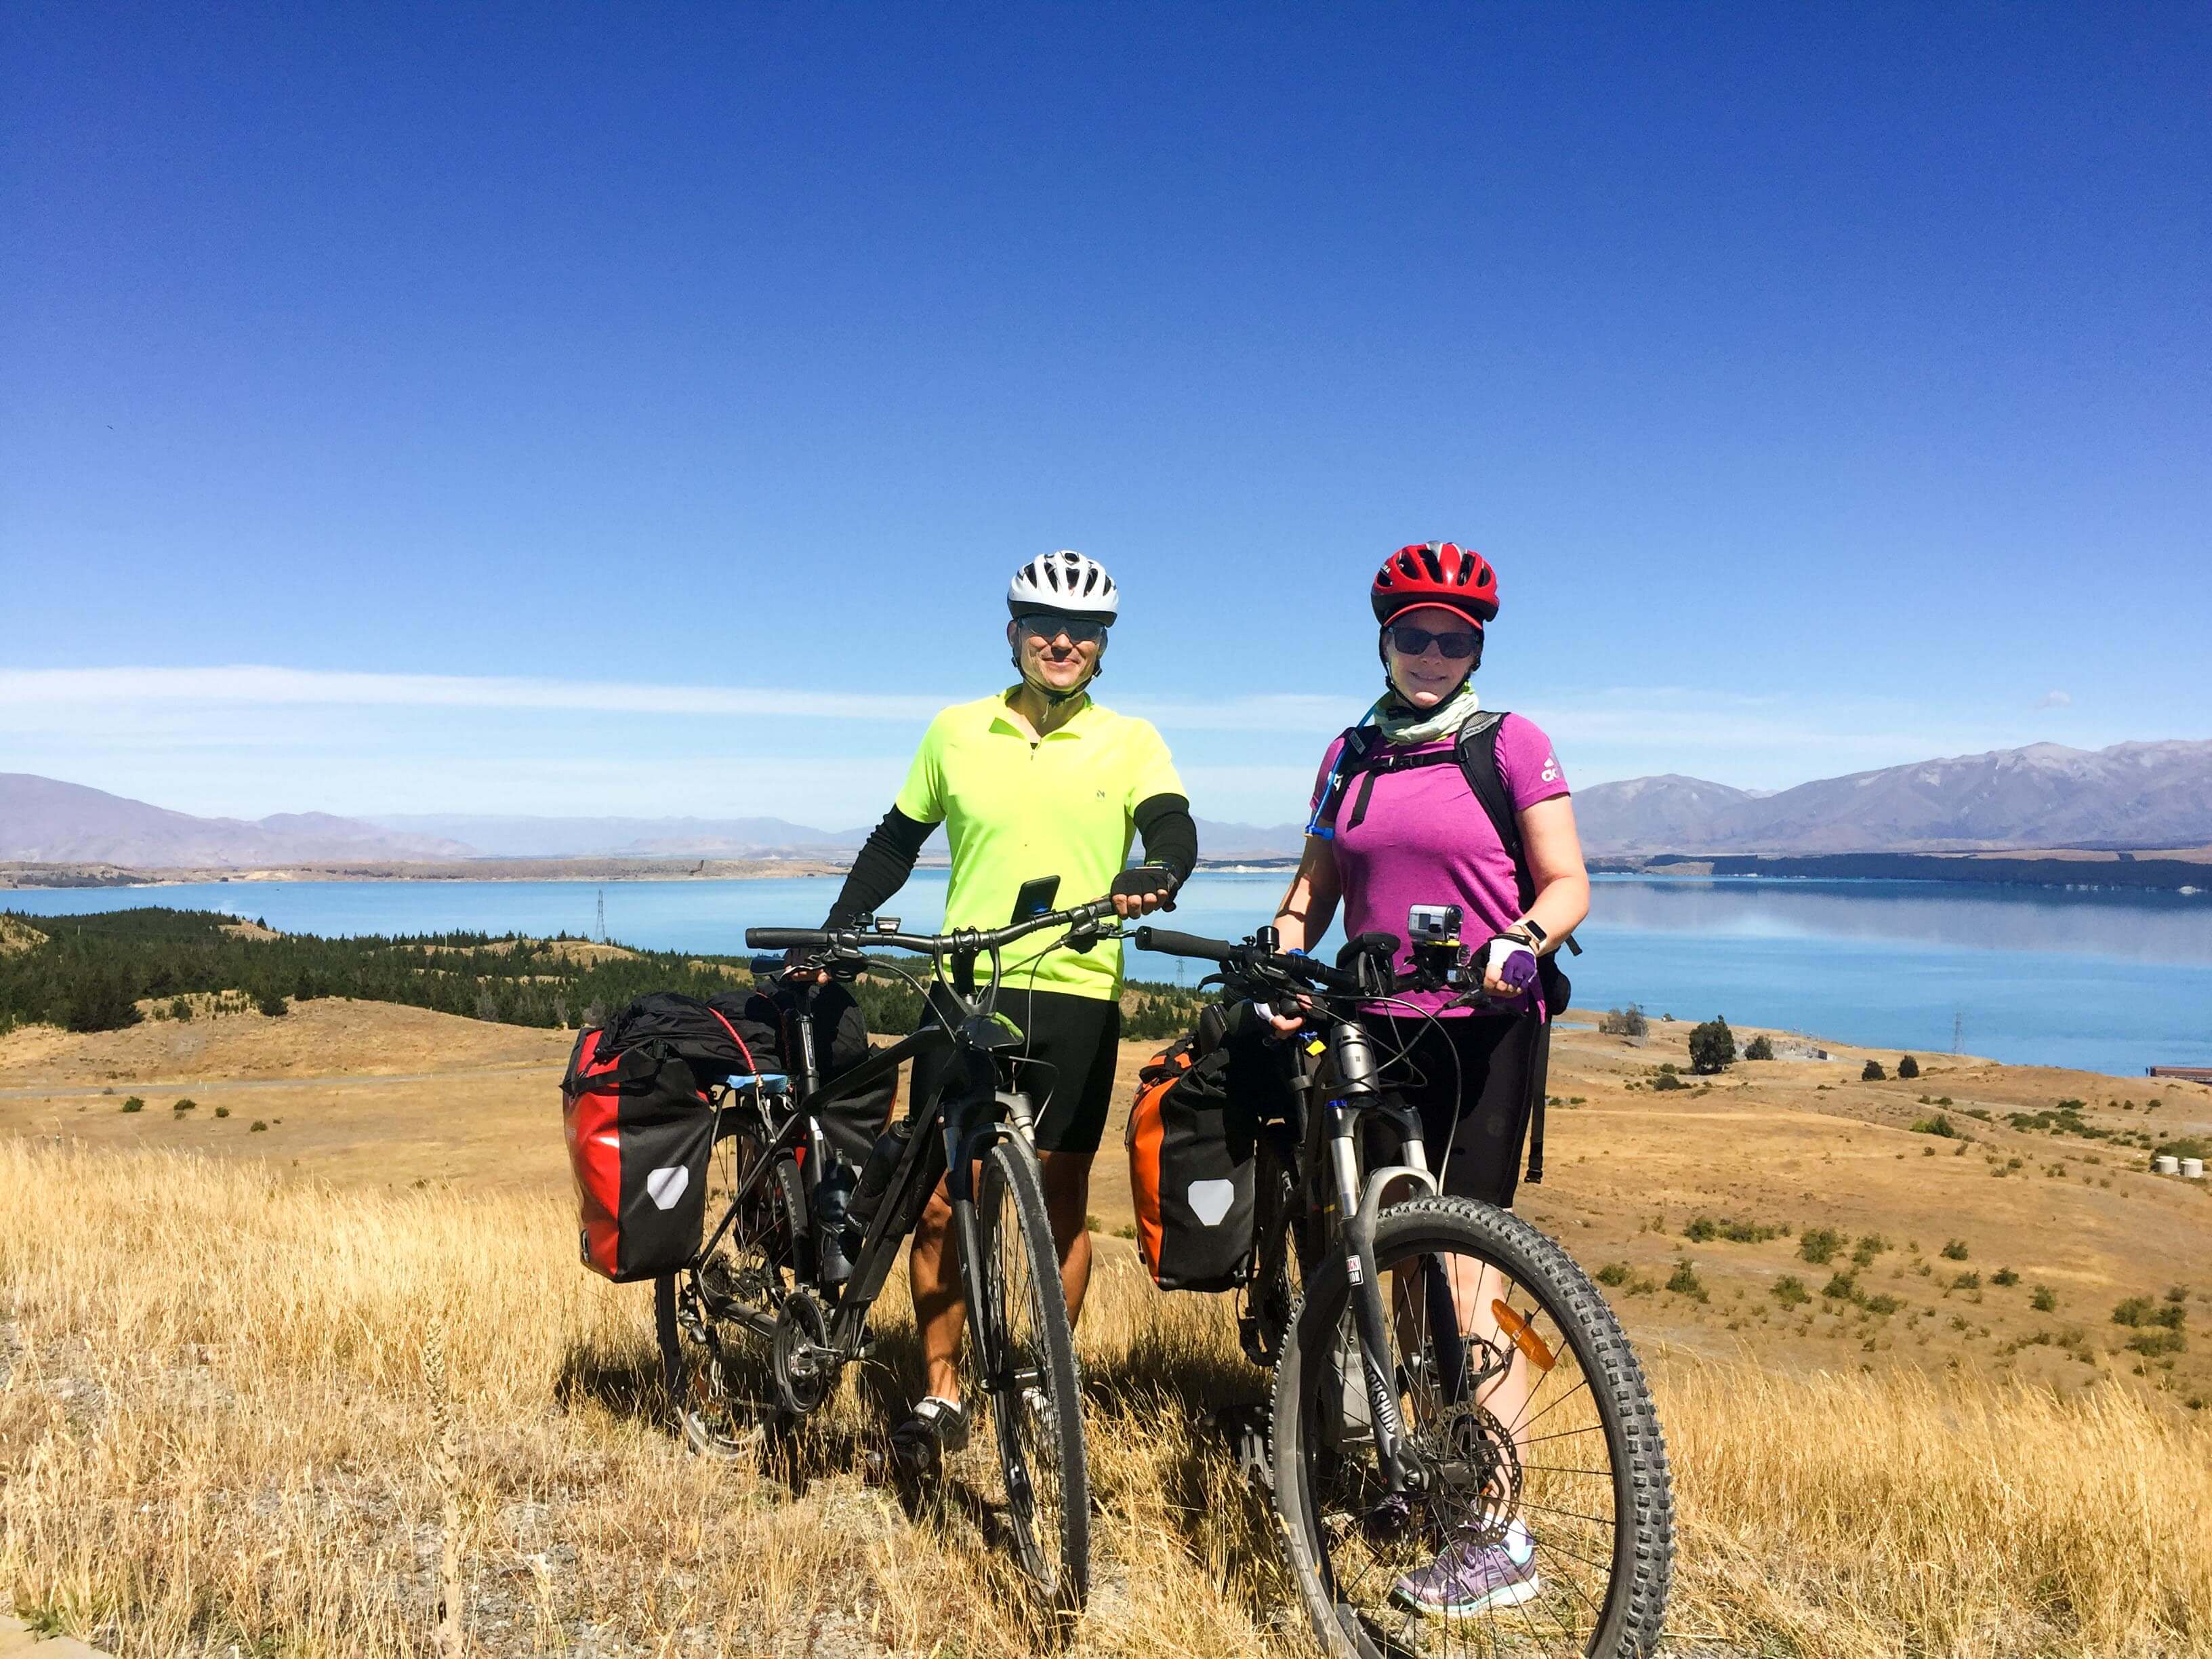 Planning a cycling holiday in NZ: Great tips for an Alps 2 Ocean cycling holiday